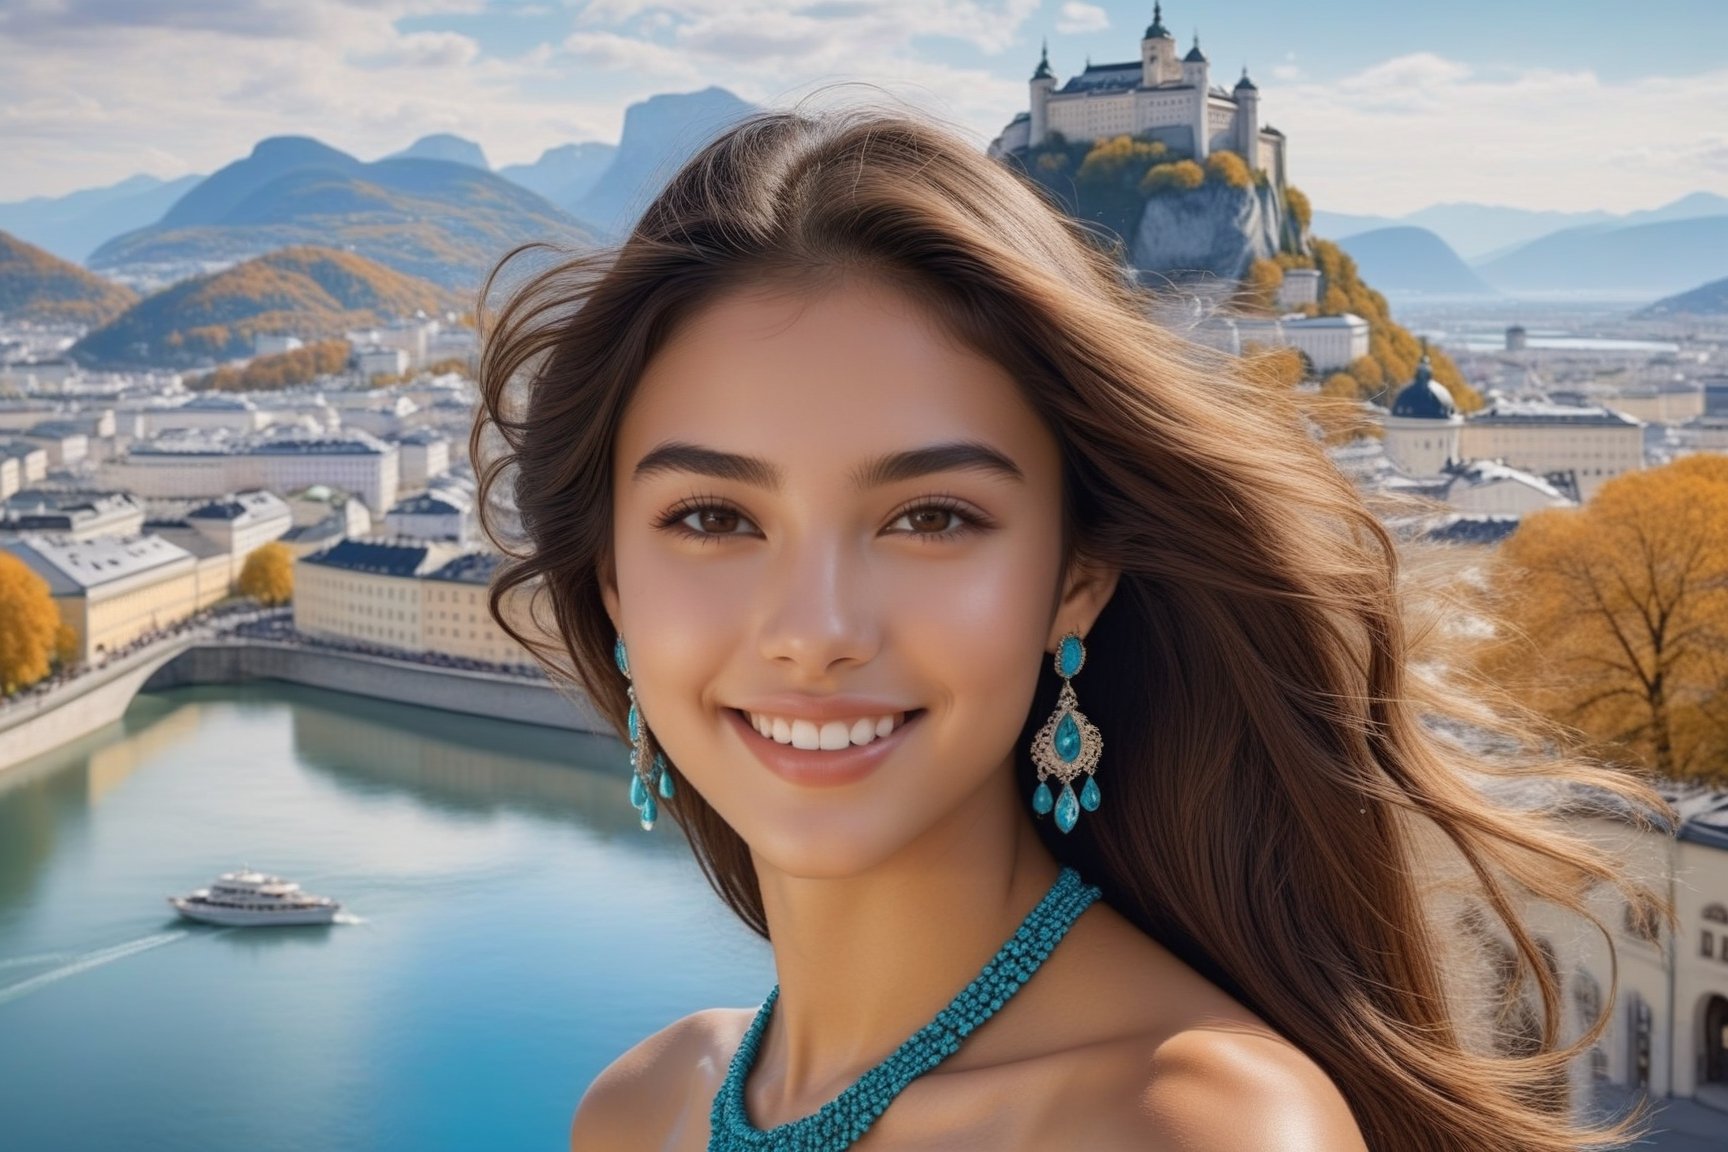 Hyper-Realistic photo of a brazilian girl,20yo,1girl,perfect female form,perfect body proportion,perfect anatomy,cyan color,elegant dress,detailed exquisite face,soft shiny skin,smile,mesmerizing,disheveled long hair,small earrings,necklaces
BREAK
(backdrop of a the iron fortress built in 1077. It is the largest castle in Europe, located in the highest part of Salzburg's old town. Thanks to its sturdy construction, it has never been invaded, so you can see the Hohensalzburg Fortress in its original form:1.2),(fullbody:1.2),(highheels:1.2),girl focus
BREAK
(rule of thirds:1.3),perfect composition,studio photo,trending on artstation,(Masterpiece,Best quality,32k,UHD:1.5),(sharp focus,high contrast,HDR,hyper-detailed,intricate details,ultra-realistic,award-winning photo,ultra-clear,kodachrome 800:1.3),(chiaroscuro lighting,soft rim lighting:1.2),by Karol Bak,Gustav Klimt and Hayao Miyazaki,real_booster, photo_b00ster,ani_booster,art_booster